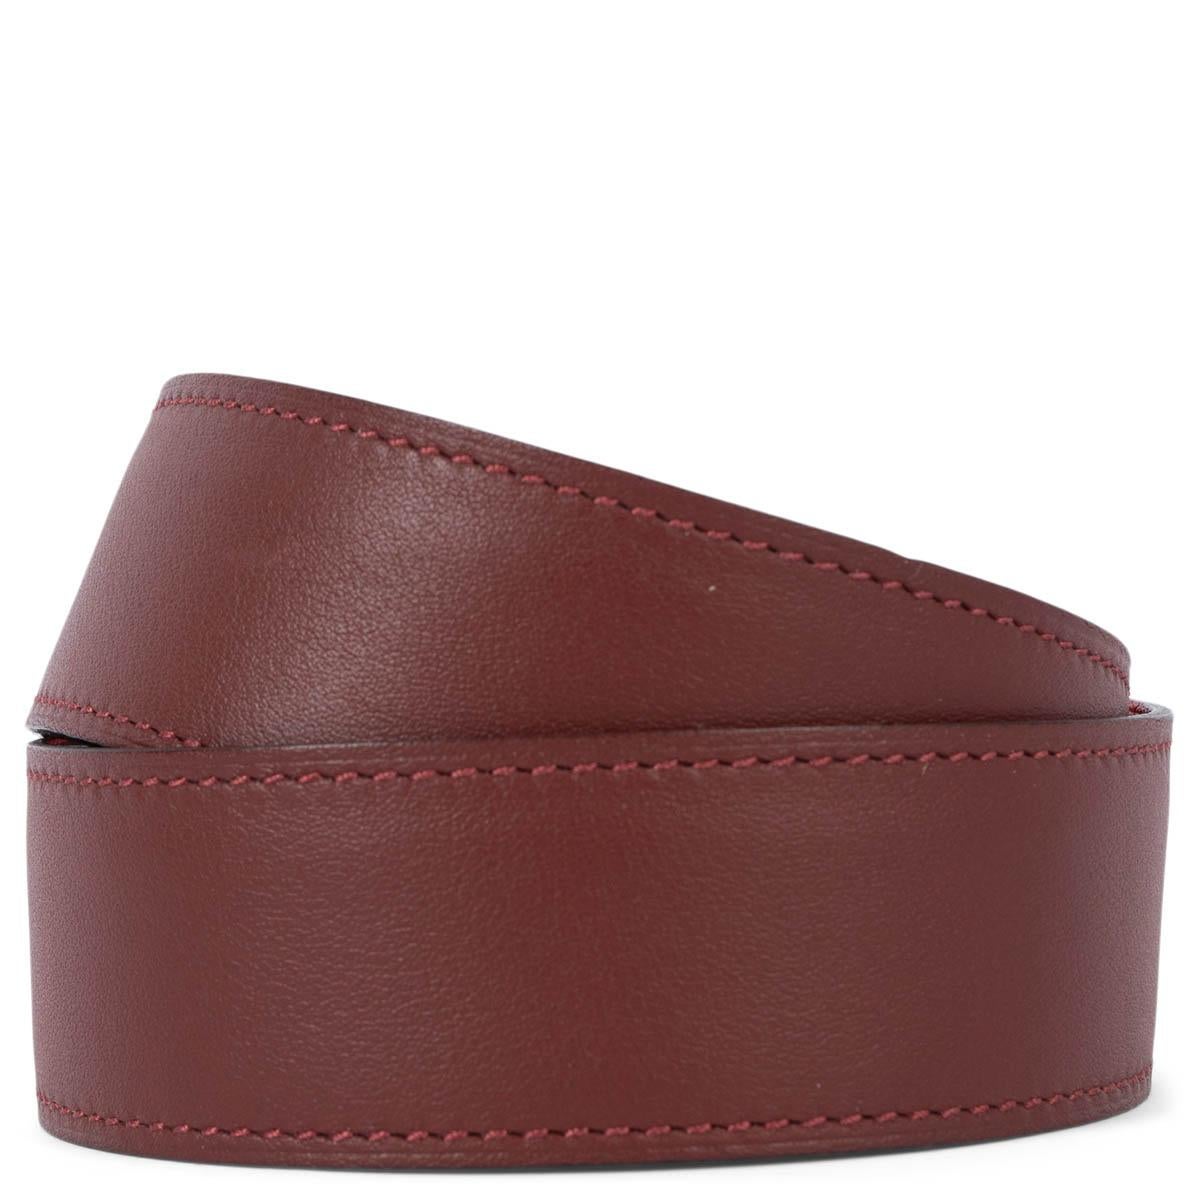 100% authentic Hermès reversible 32mm belt strap in Casaque Veau Epsom and Rouge H Veau Swift. Has been worn and shows a dent in the middle of the belt. Overall in very good condition. Comes with box and dust bag. 

Measurements
Tag